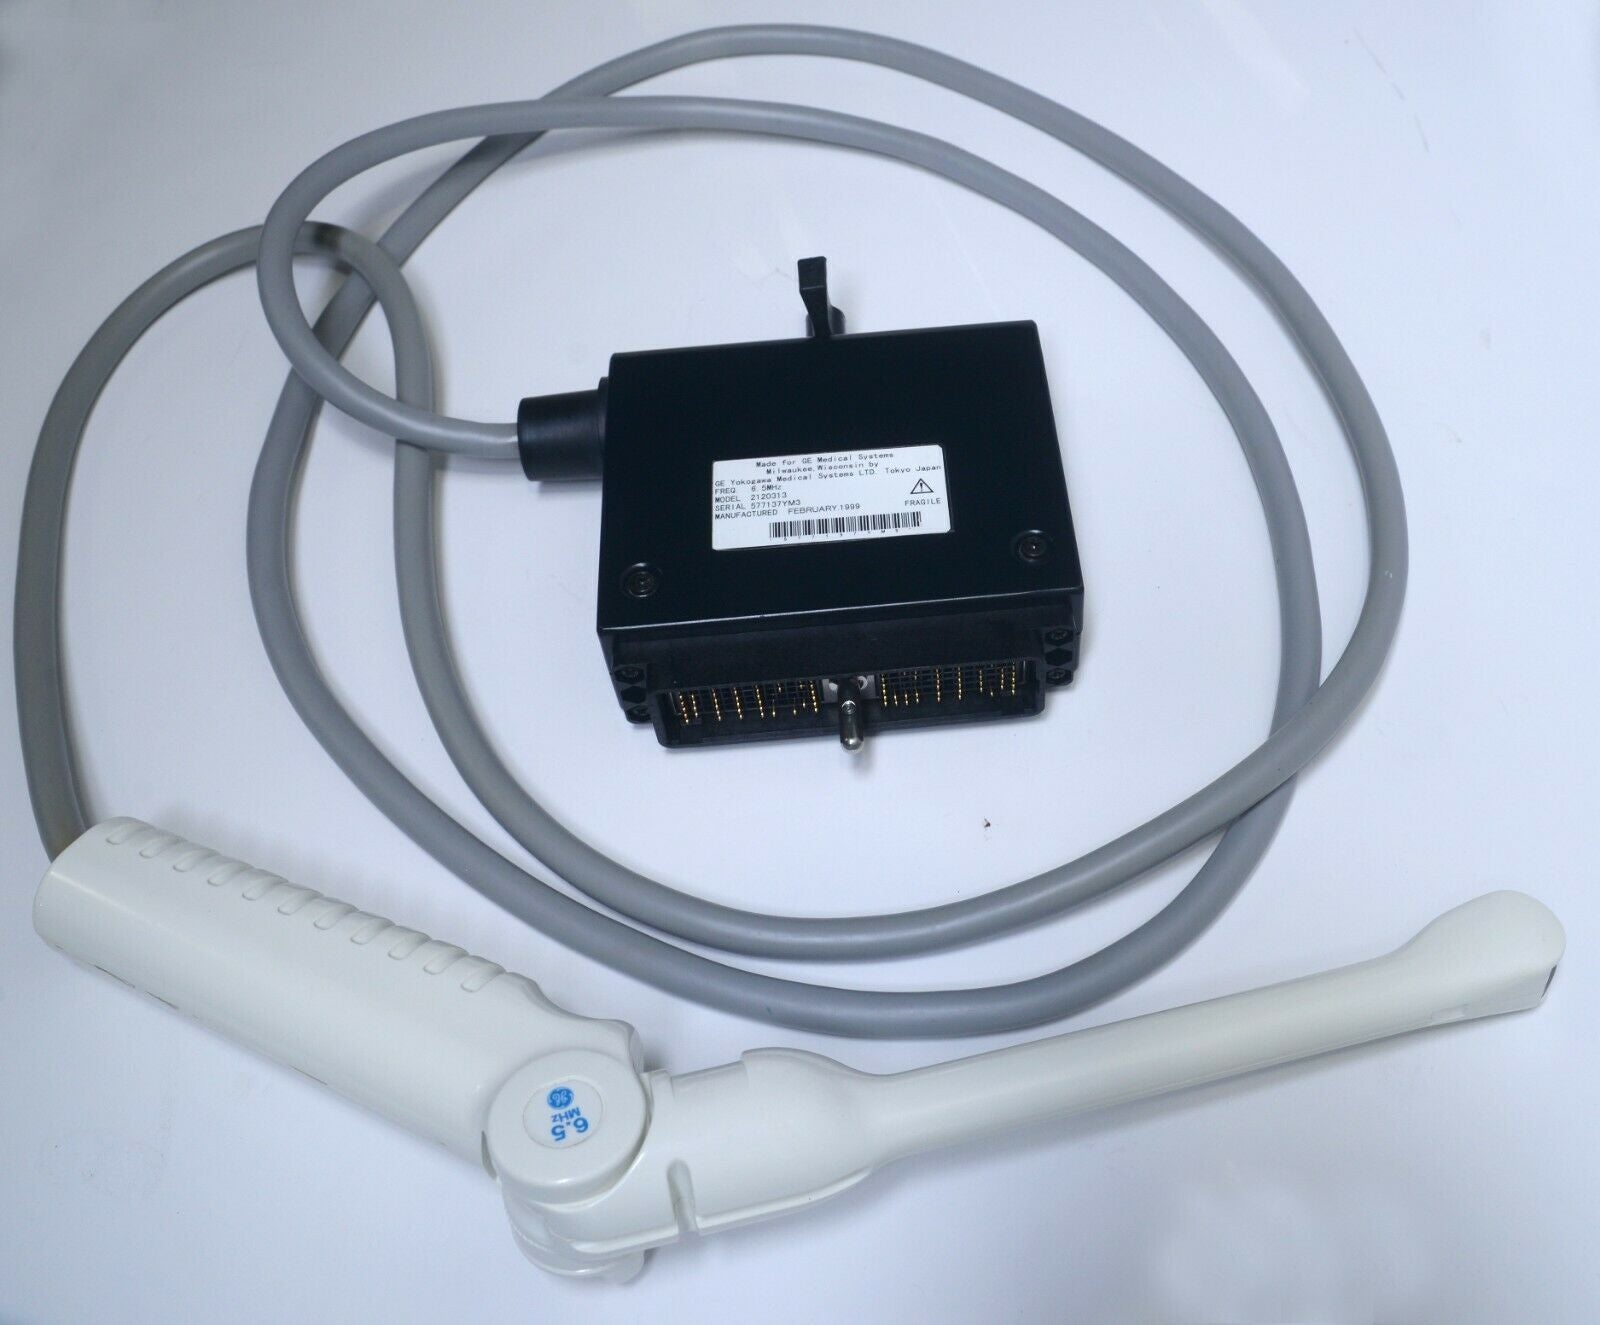 #2120313 GE 6.5MHz Endocavity Endovaginal Ultrasound Probe for RT3200 System DIAGNOSTIC ULTRASOUND MACHINES FOR SALE